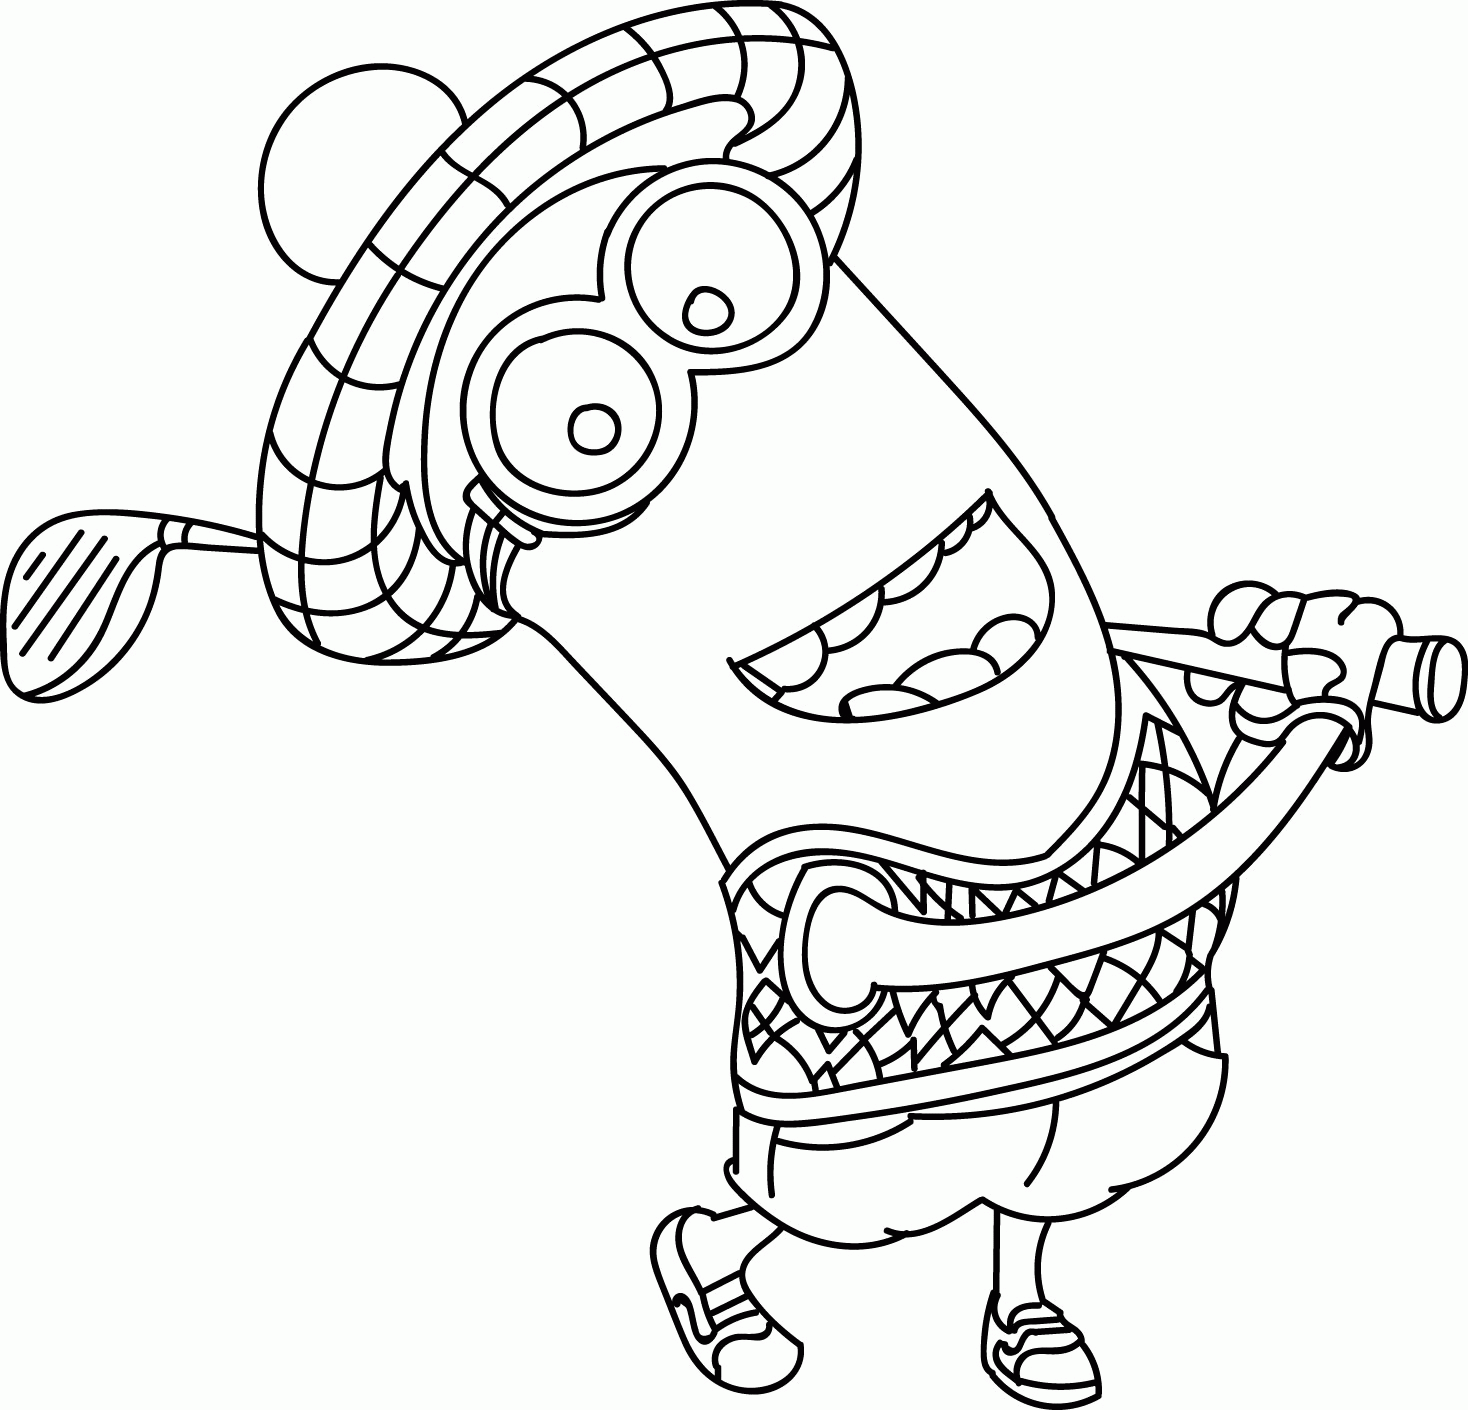 Minions Coloring Pages | Wecoloringpage